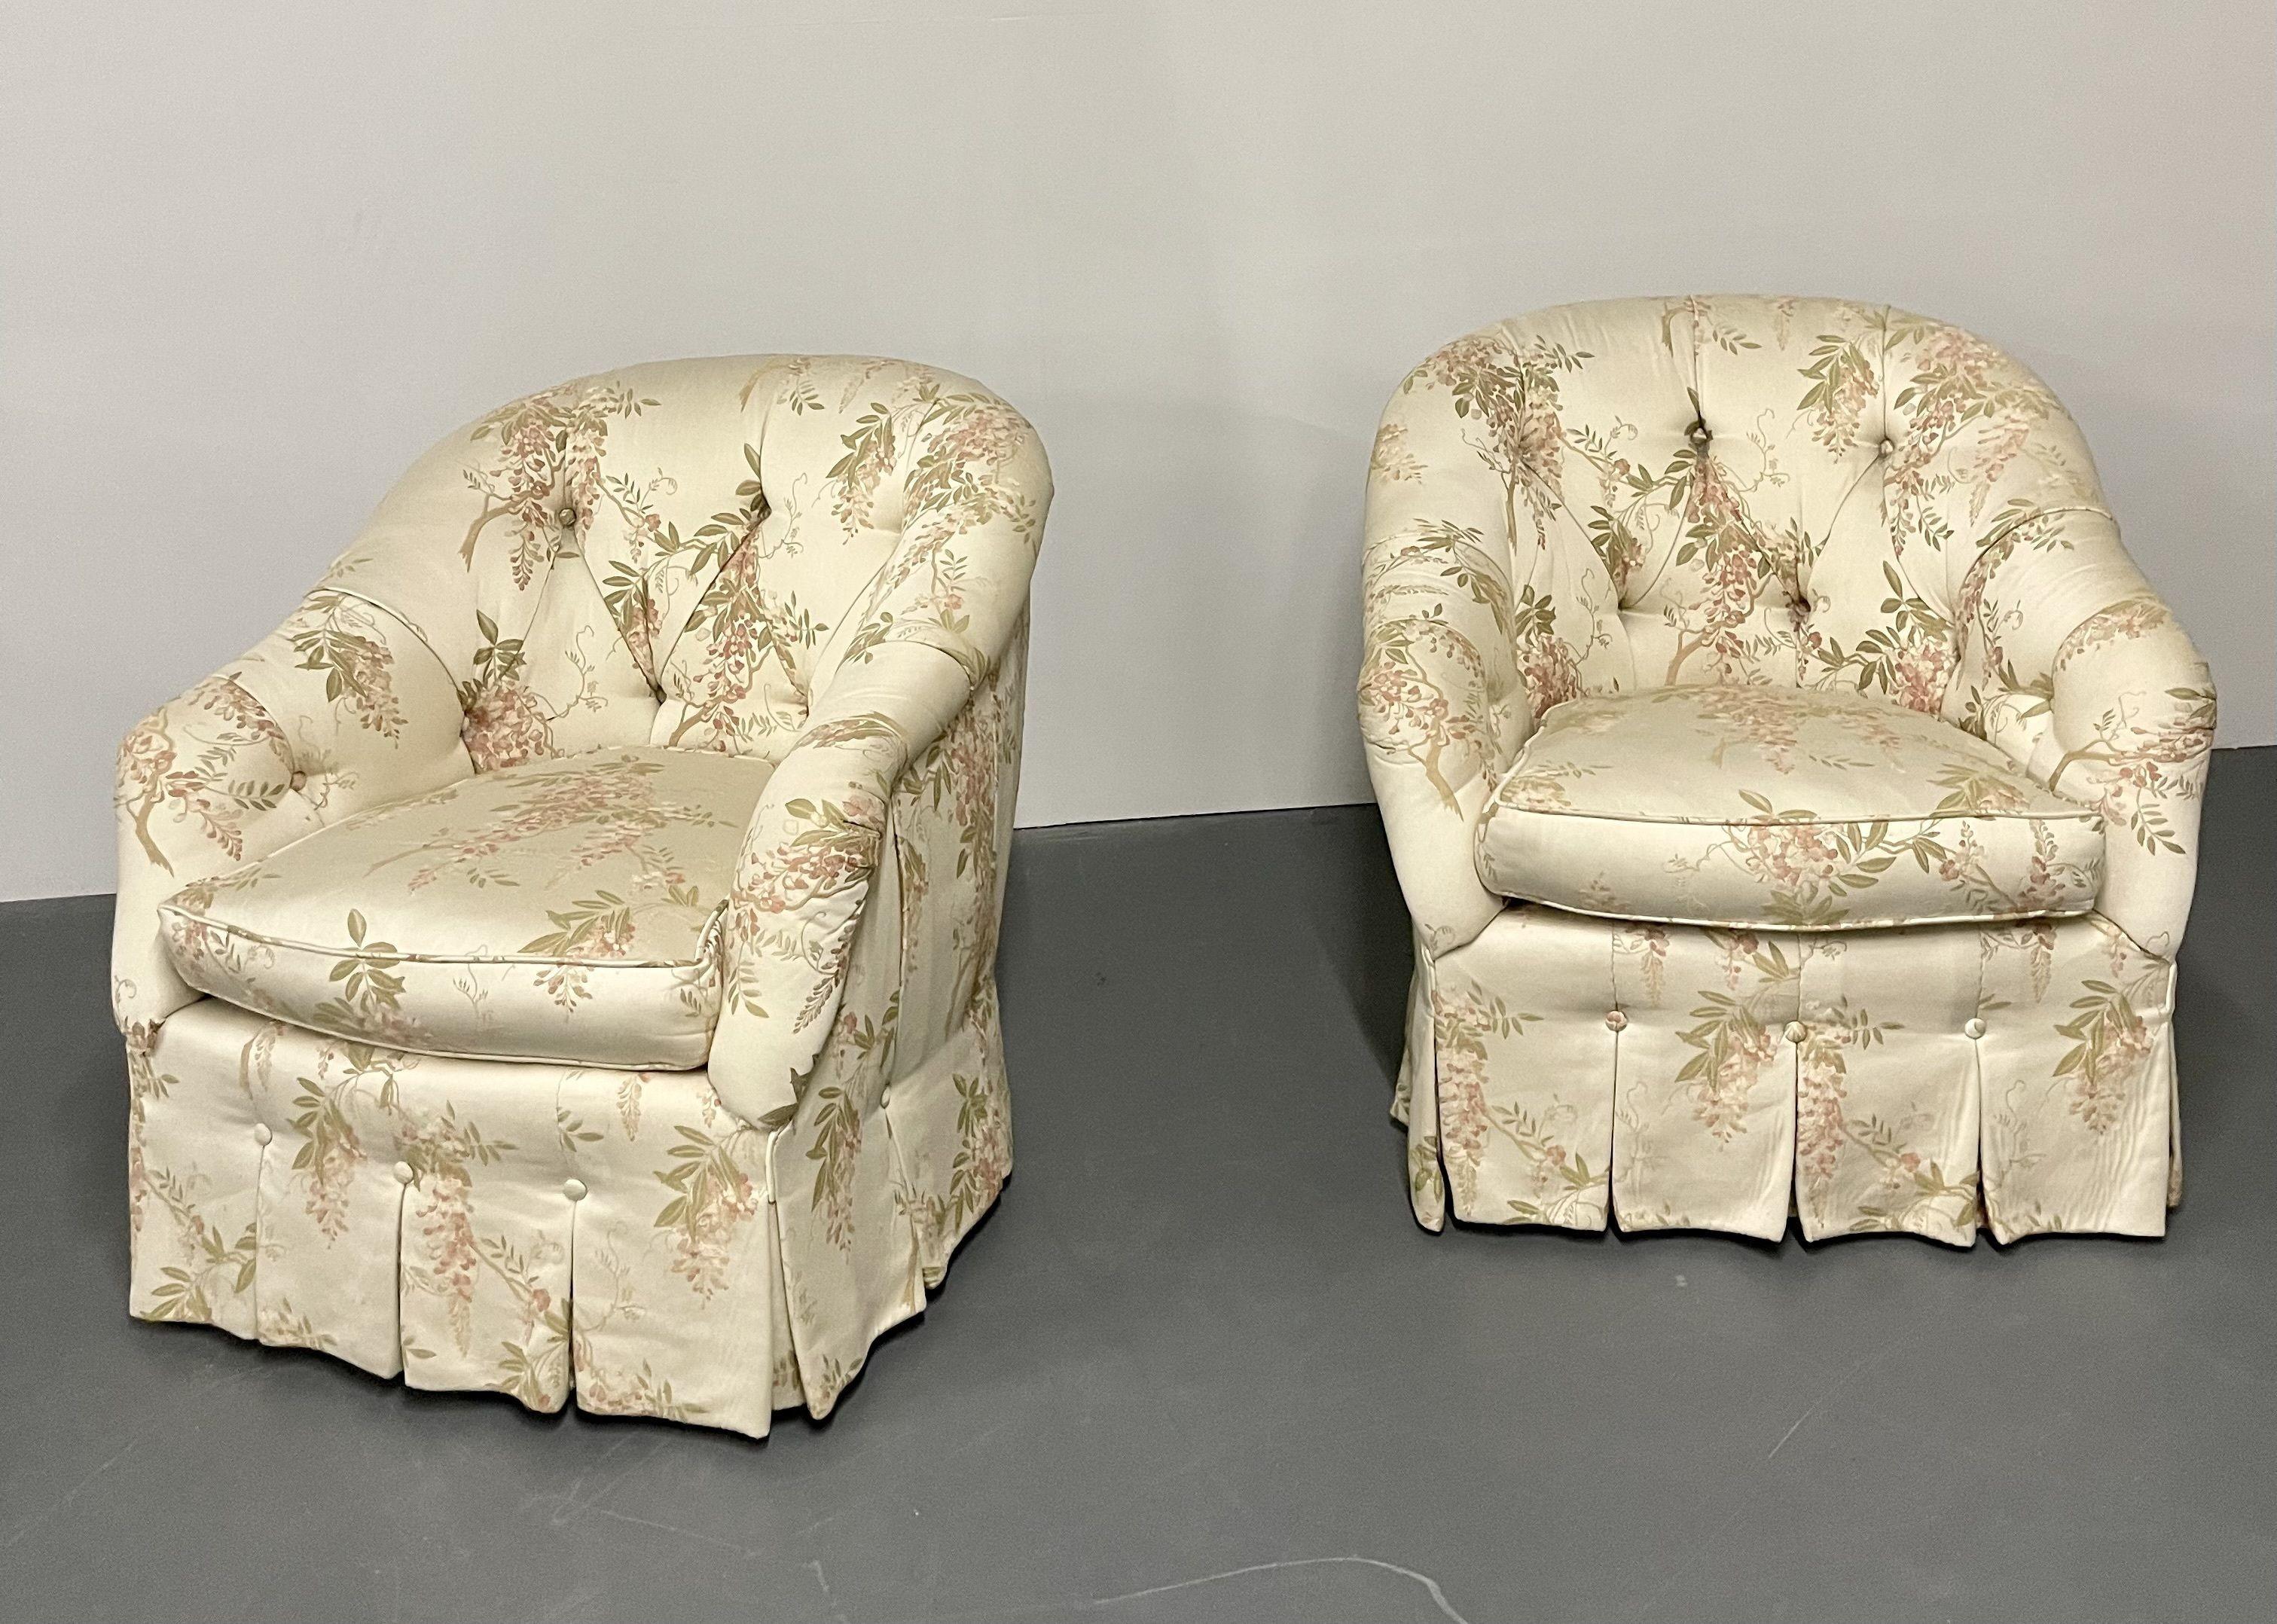 Mid-Century Modern Pair of Floral Swivel Chairs, Milo Baughman, Scalamandré, Lounge Chairs